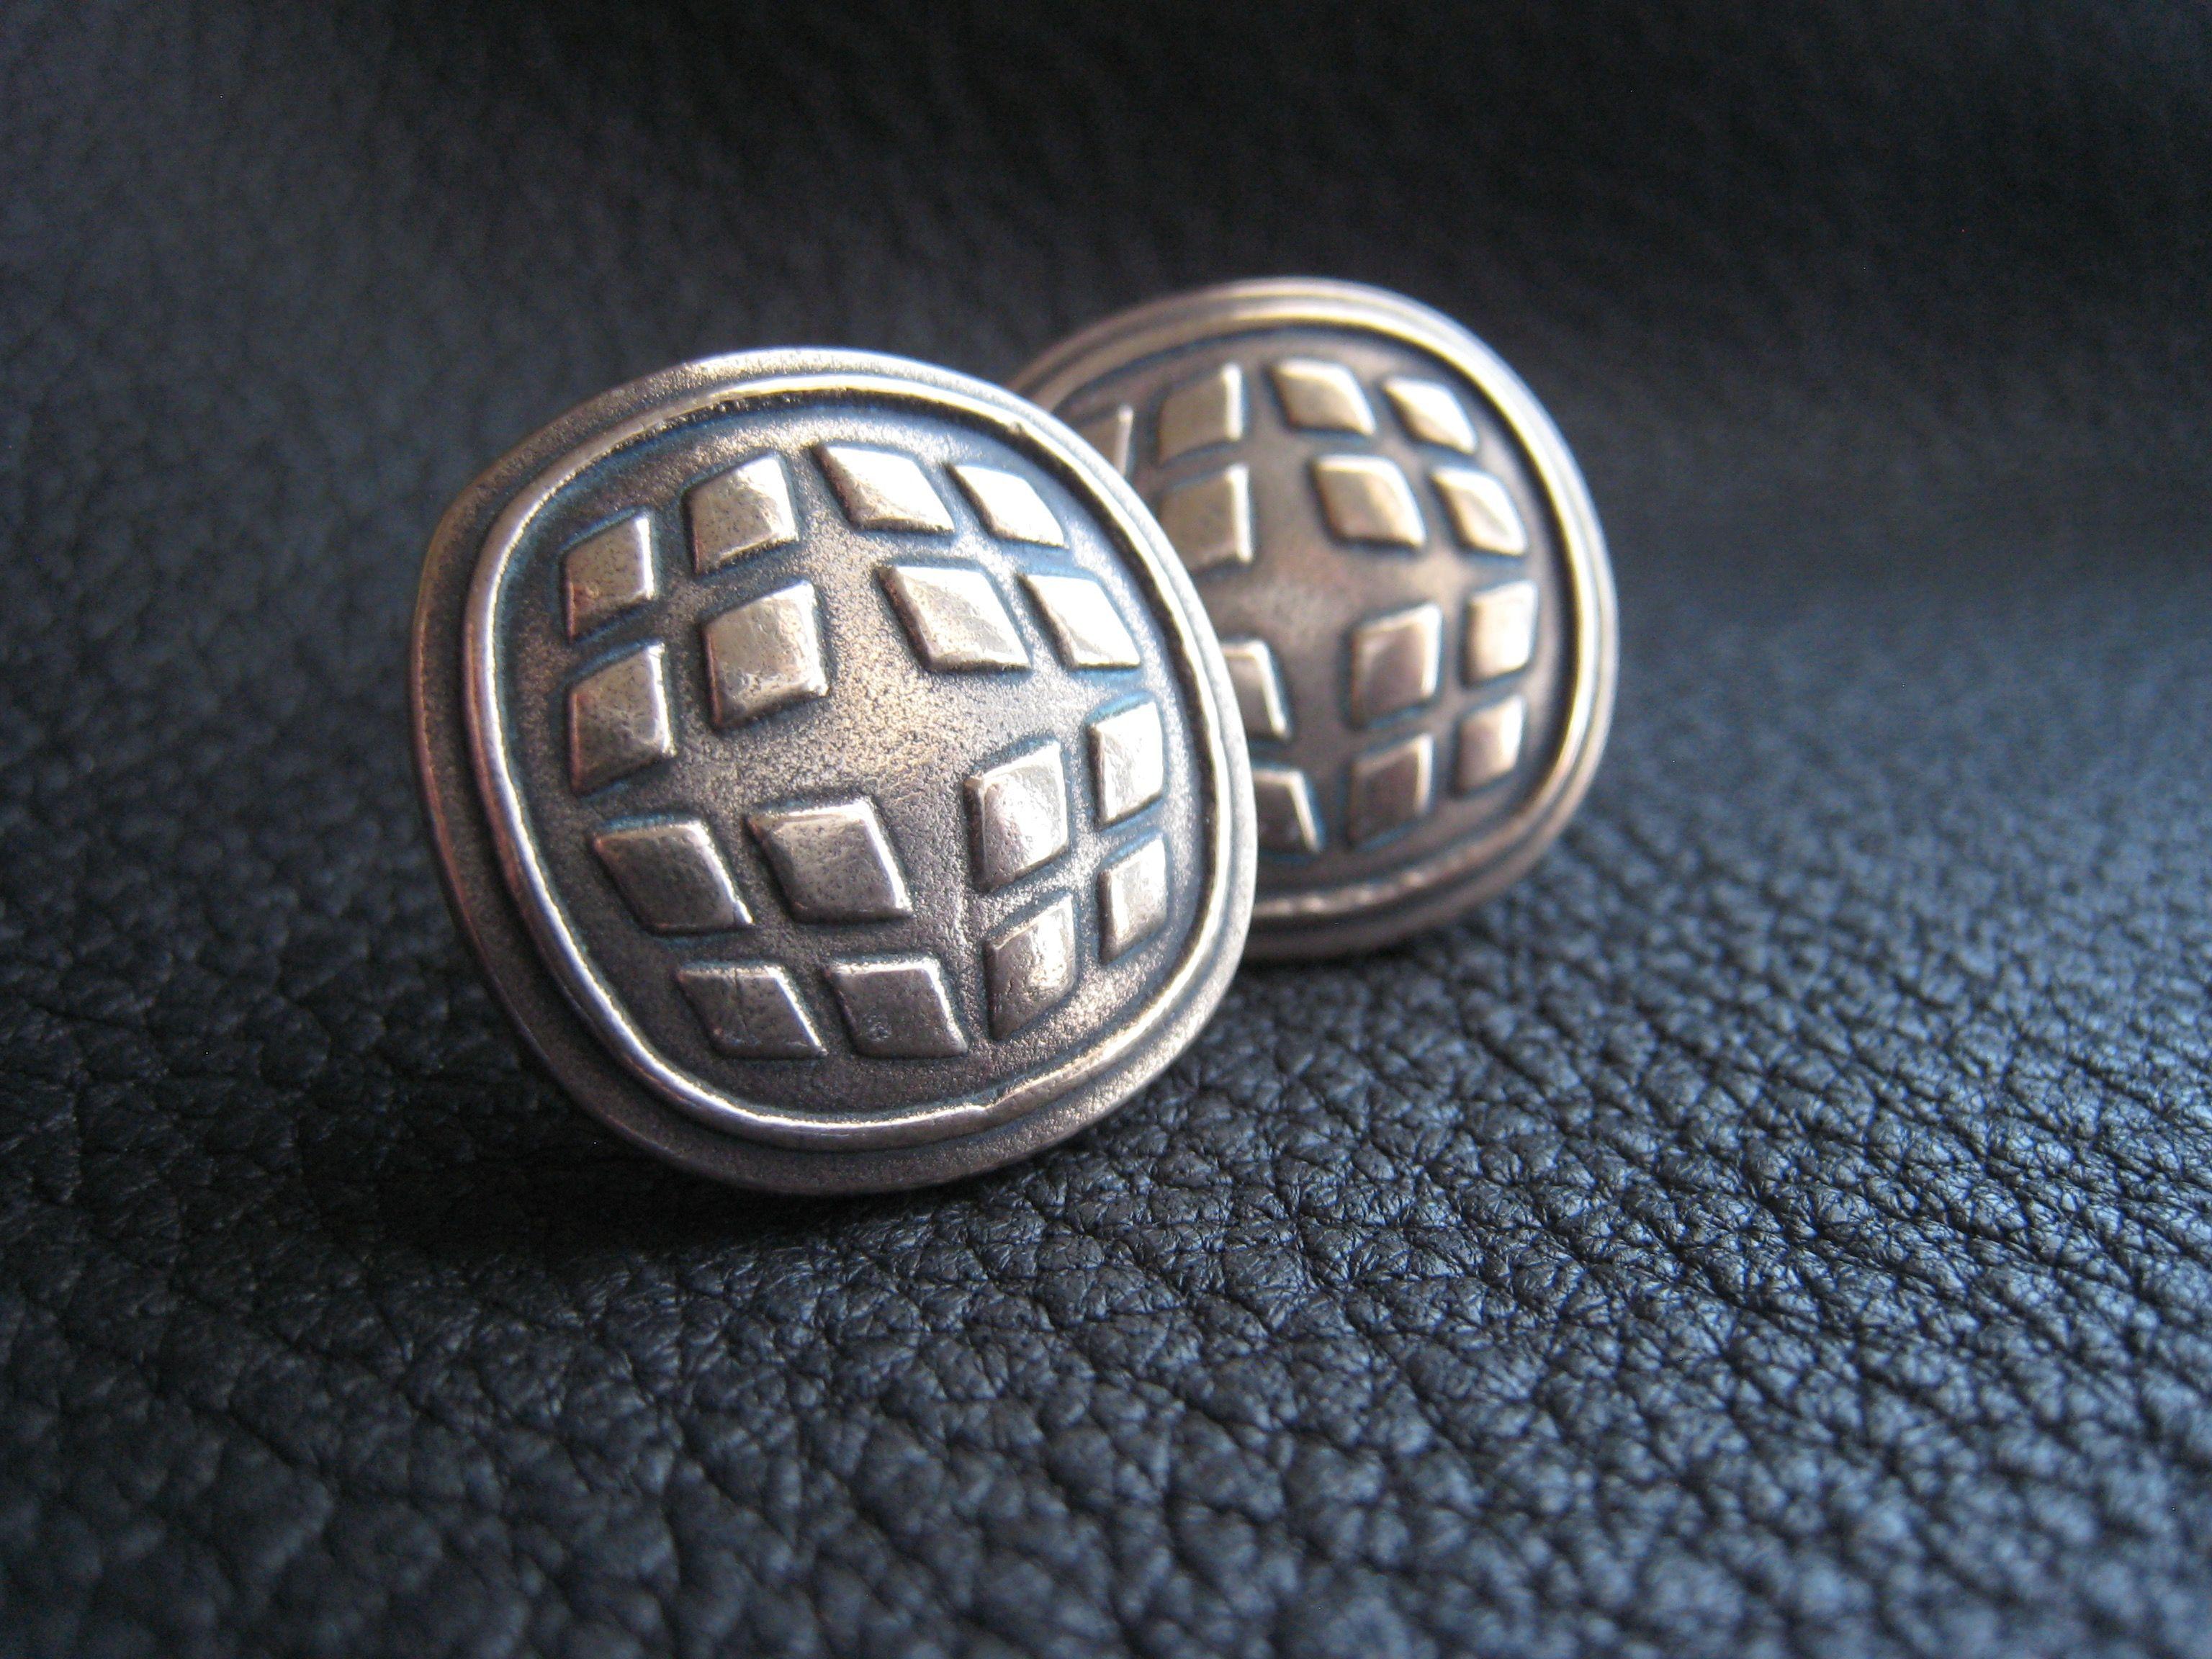 Bronze Company Logo - Hand Crafted Solid Bronze Golden Cuff Links Cufflinks With Company